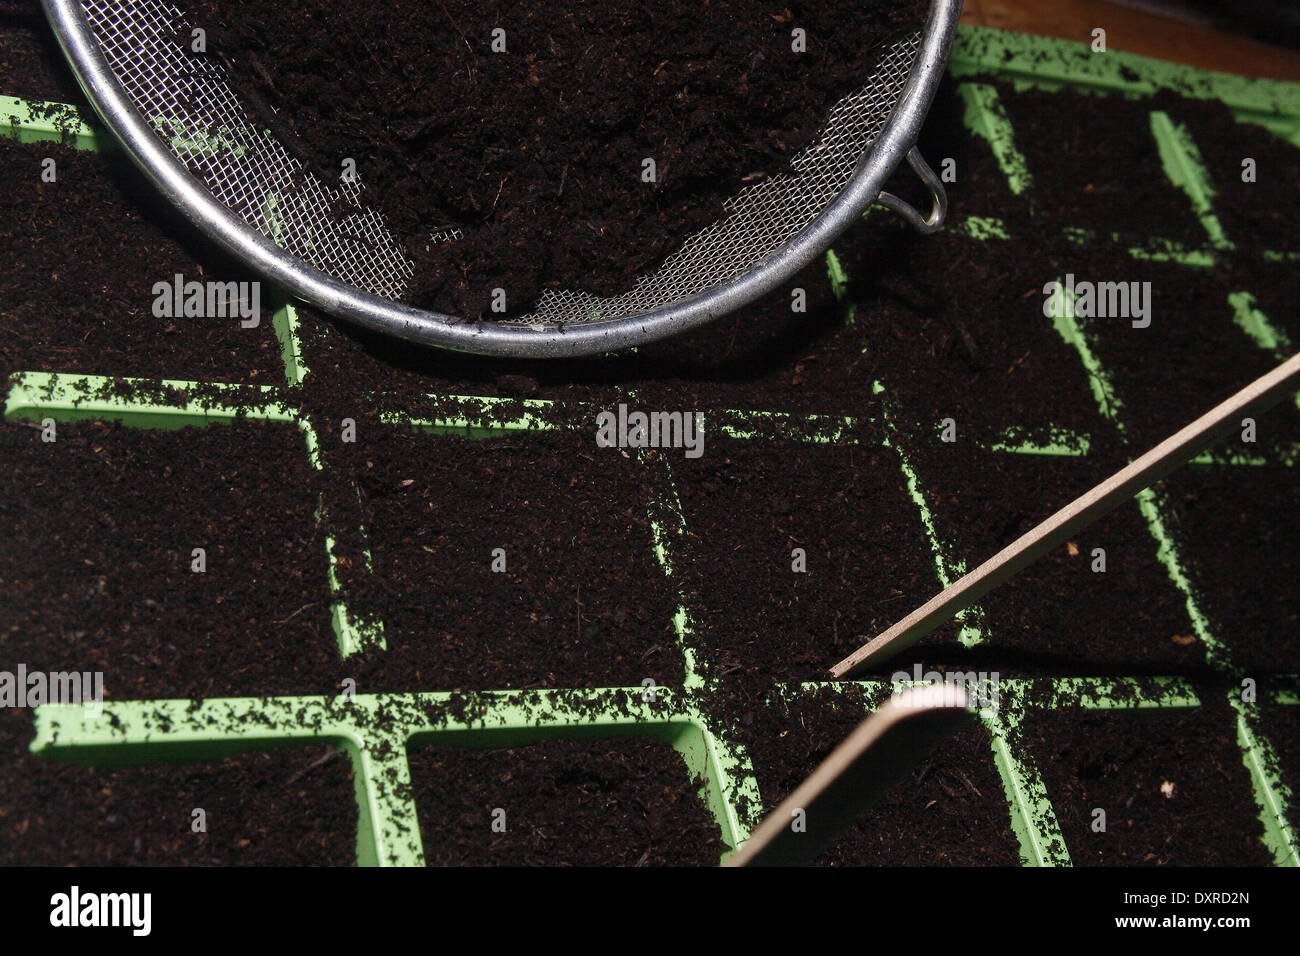 close up image of seed modules filled with sieved compost Stock Photo